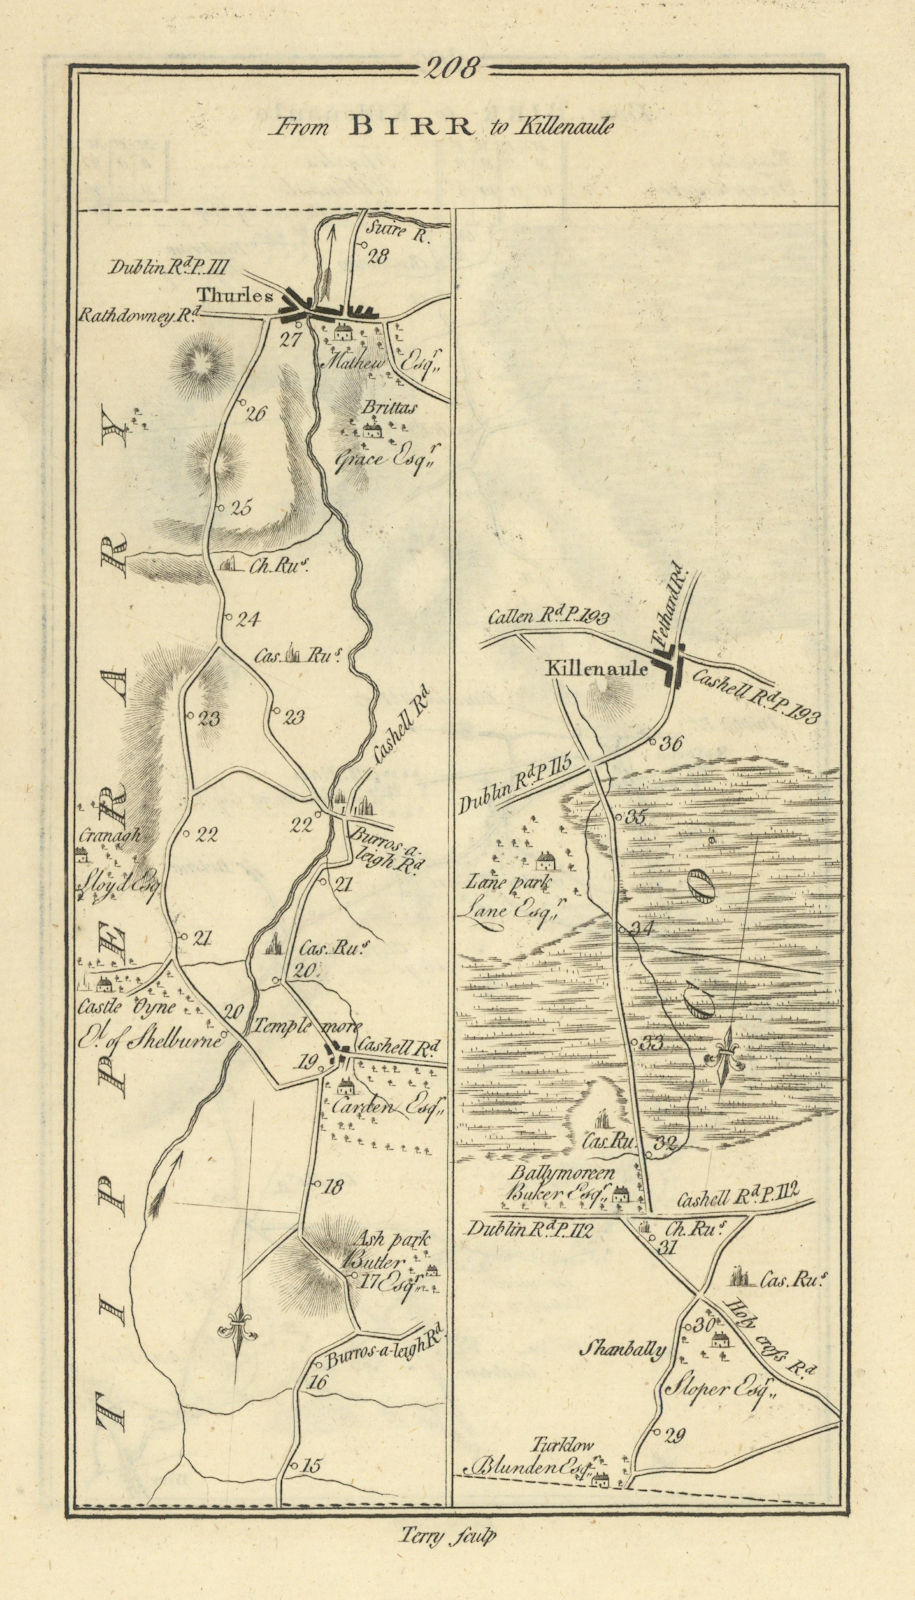 Associate Product #208 From Birr to Killenaule. Thurles Tipperary. TAYLOR/SKINNER 1778 old map